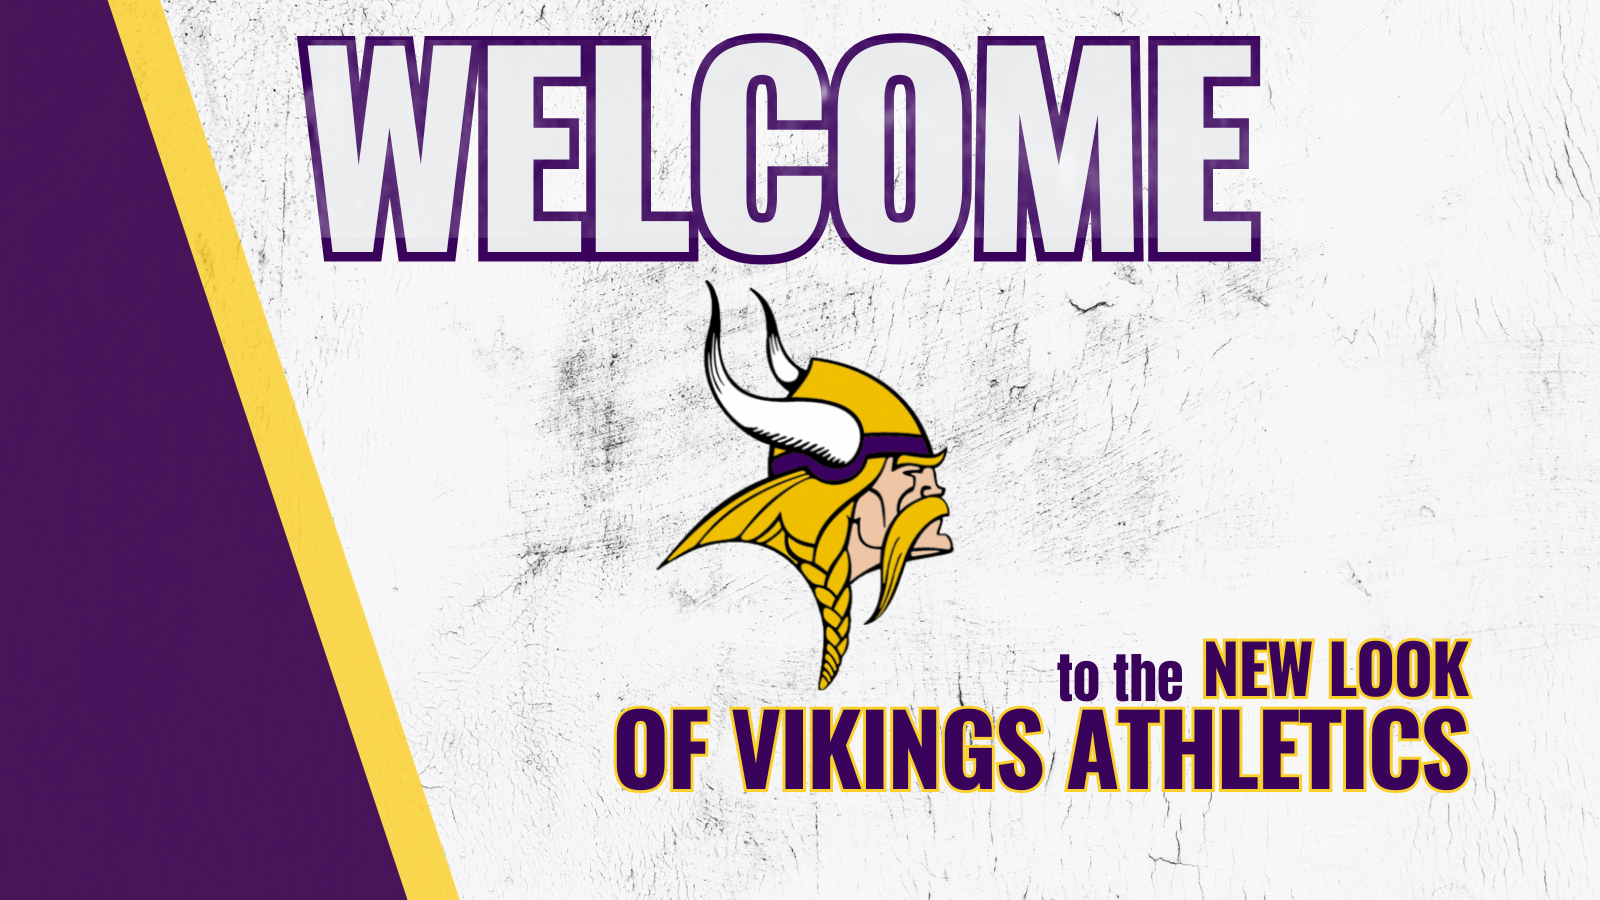 1710349586_CopyofOleyValleyWelcometo1280x320pxTwitterPost21.png - Image for 🎉 Exciting News for Vikings Fans! 🎉